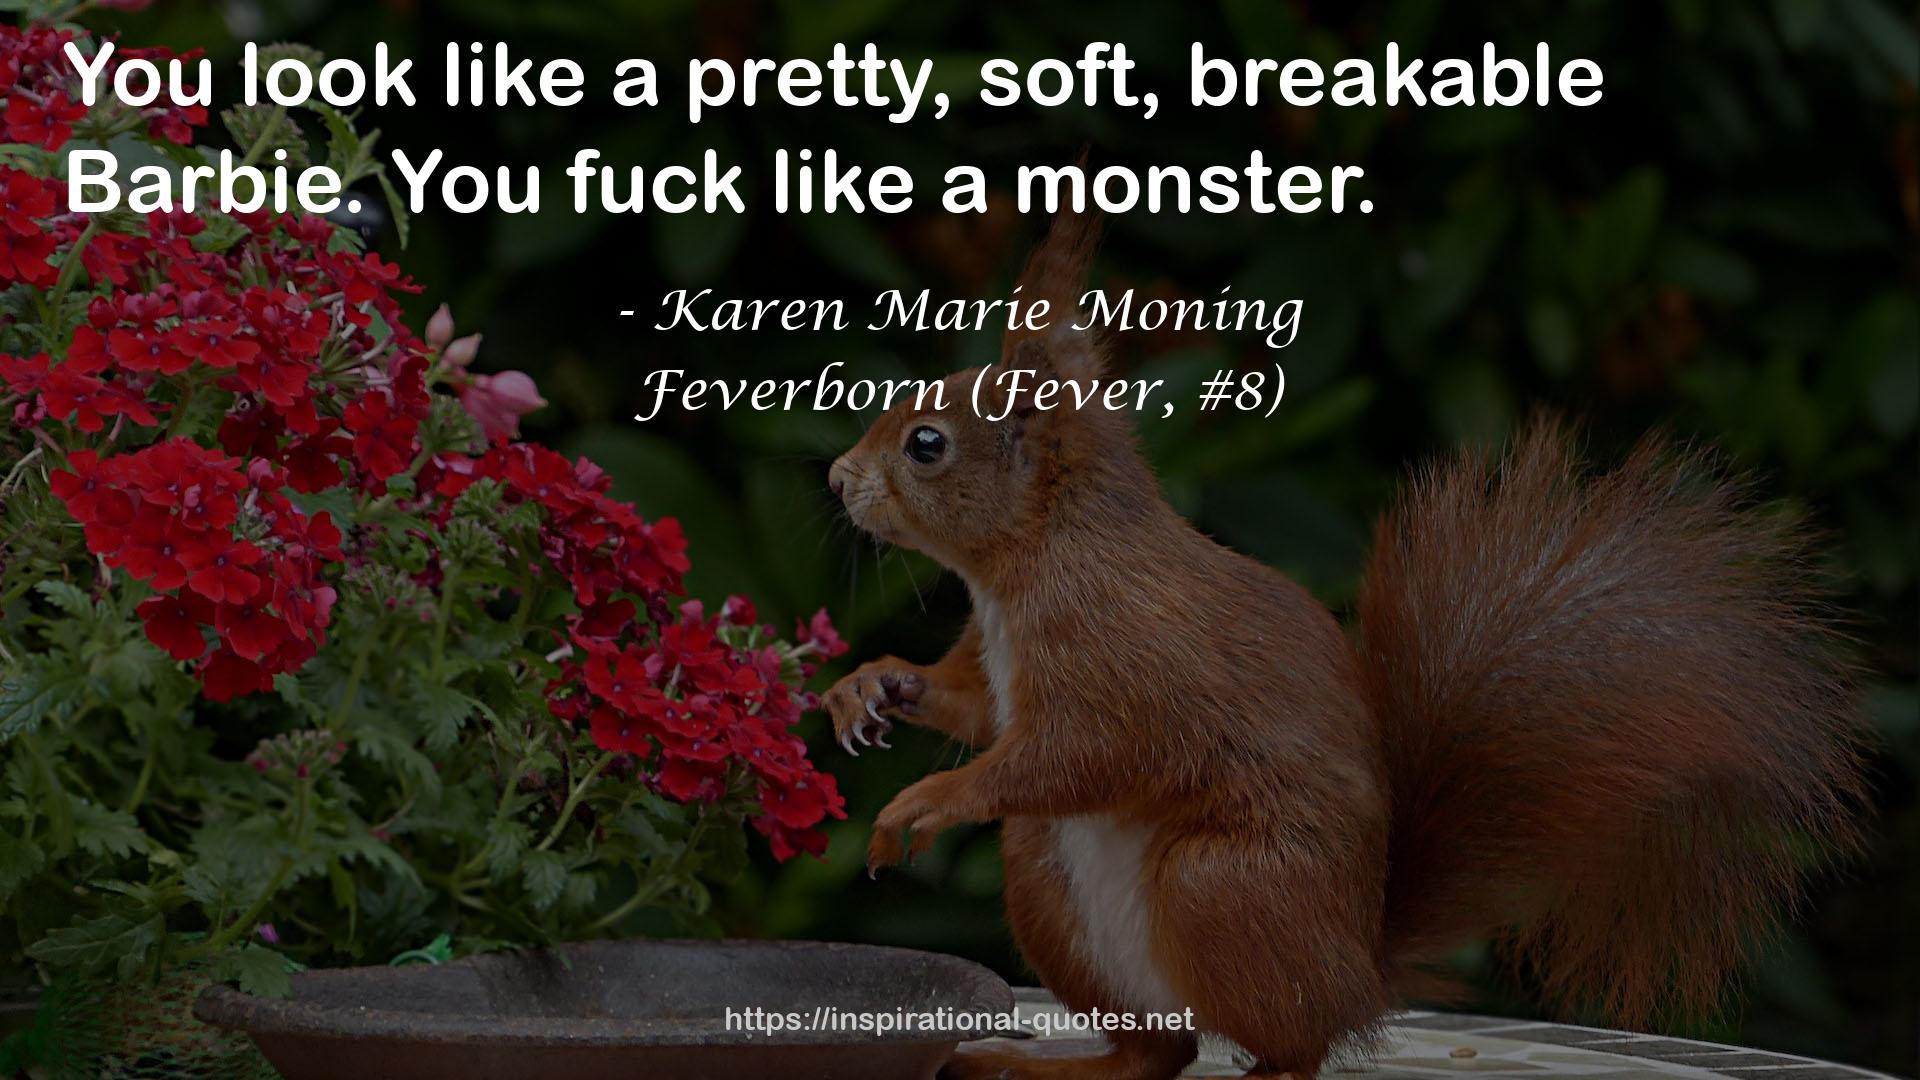 Feverborn (Fever, #8) QUOTES